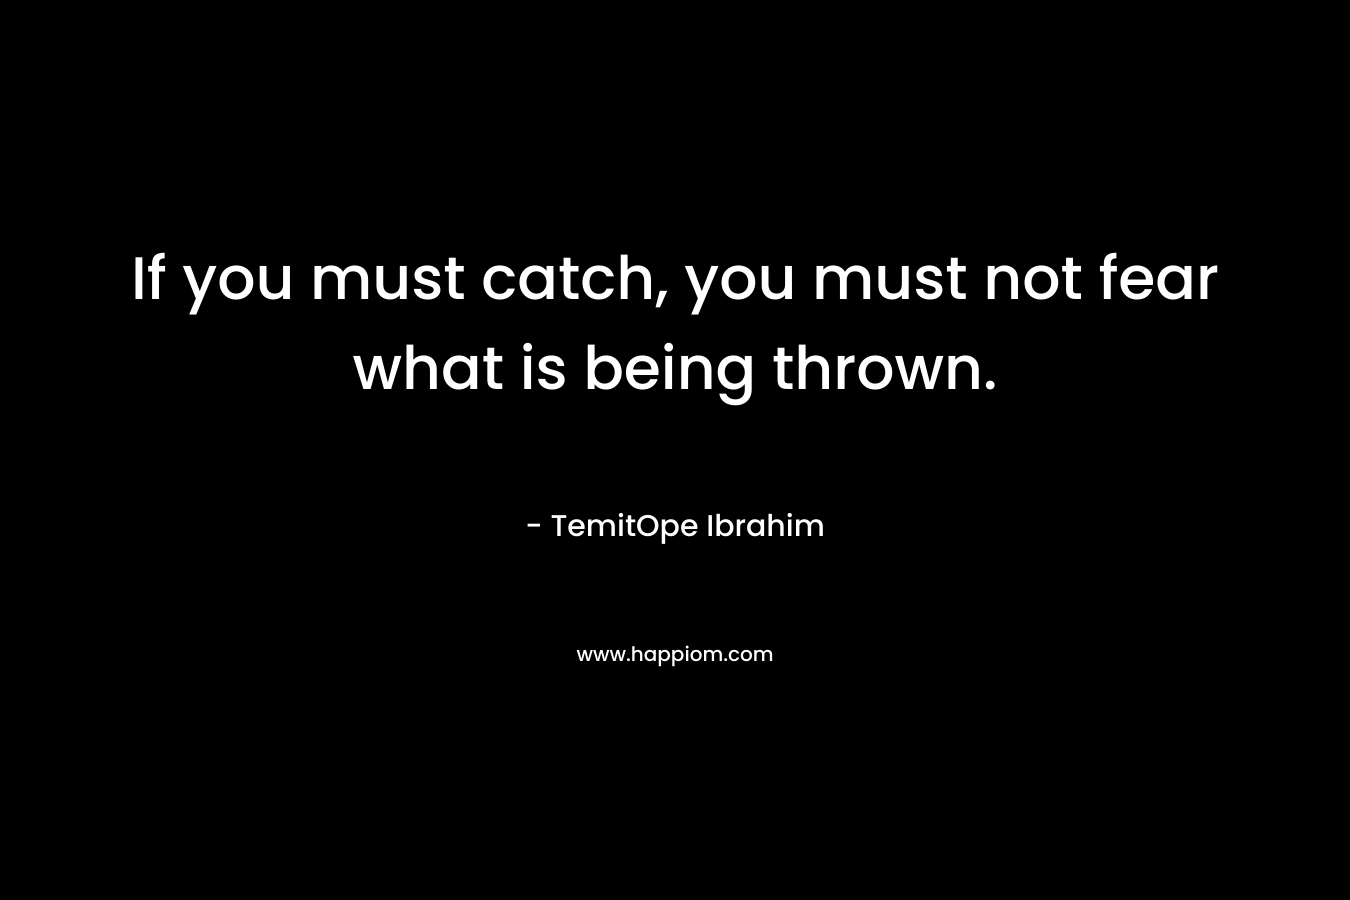 If you must catch, you must not fear what is being thrown.